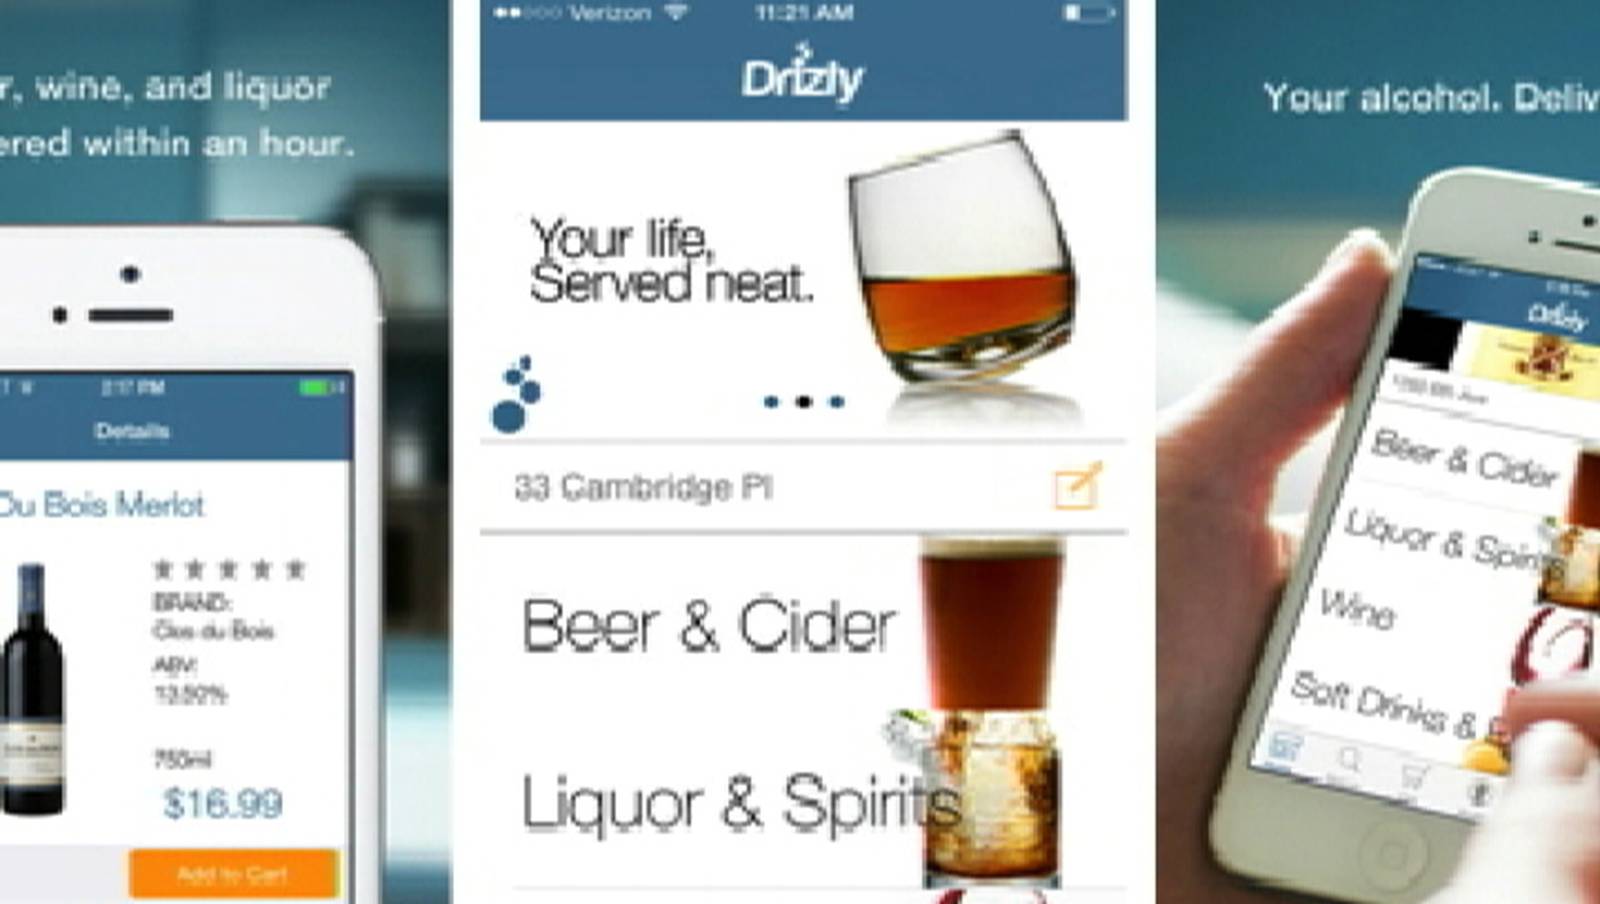 Alcohol delivery app launches in Seattle KIRO 7 News Seattle